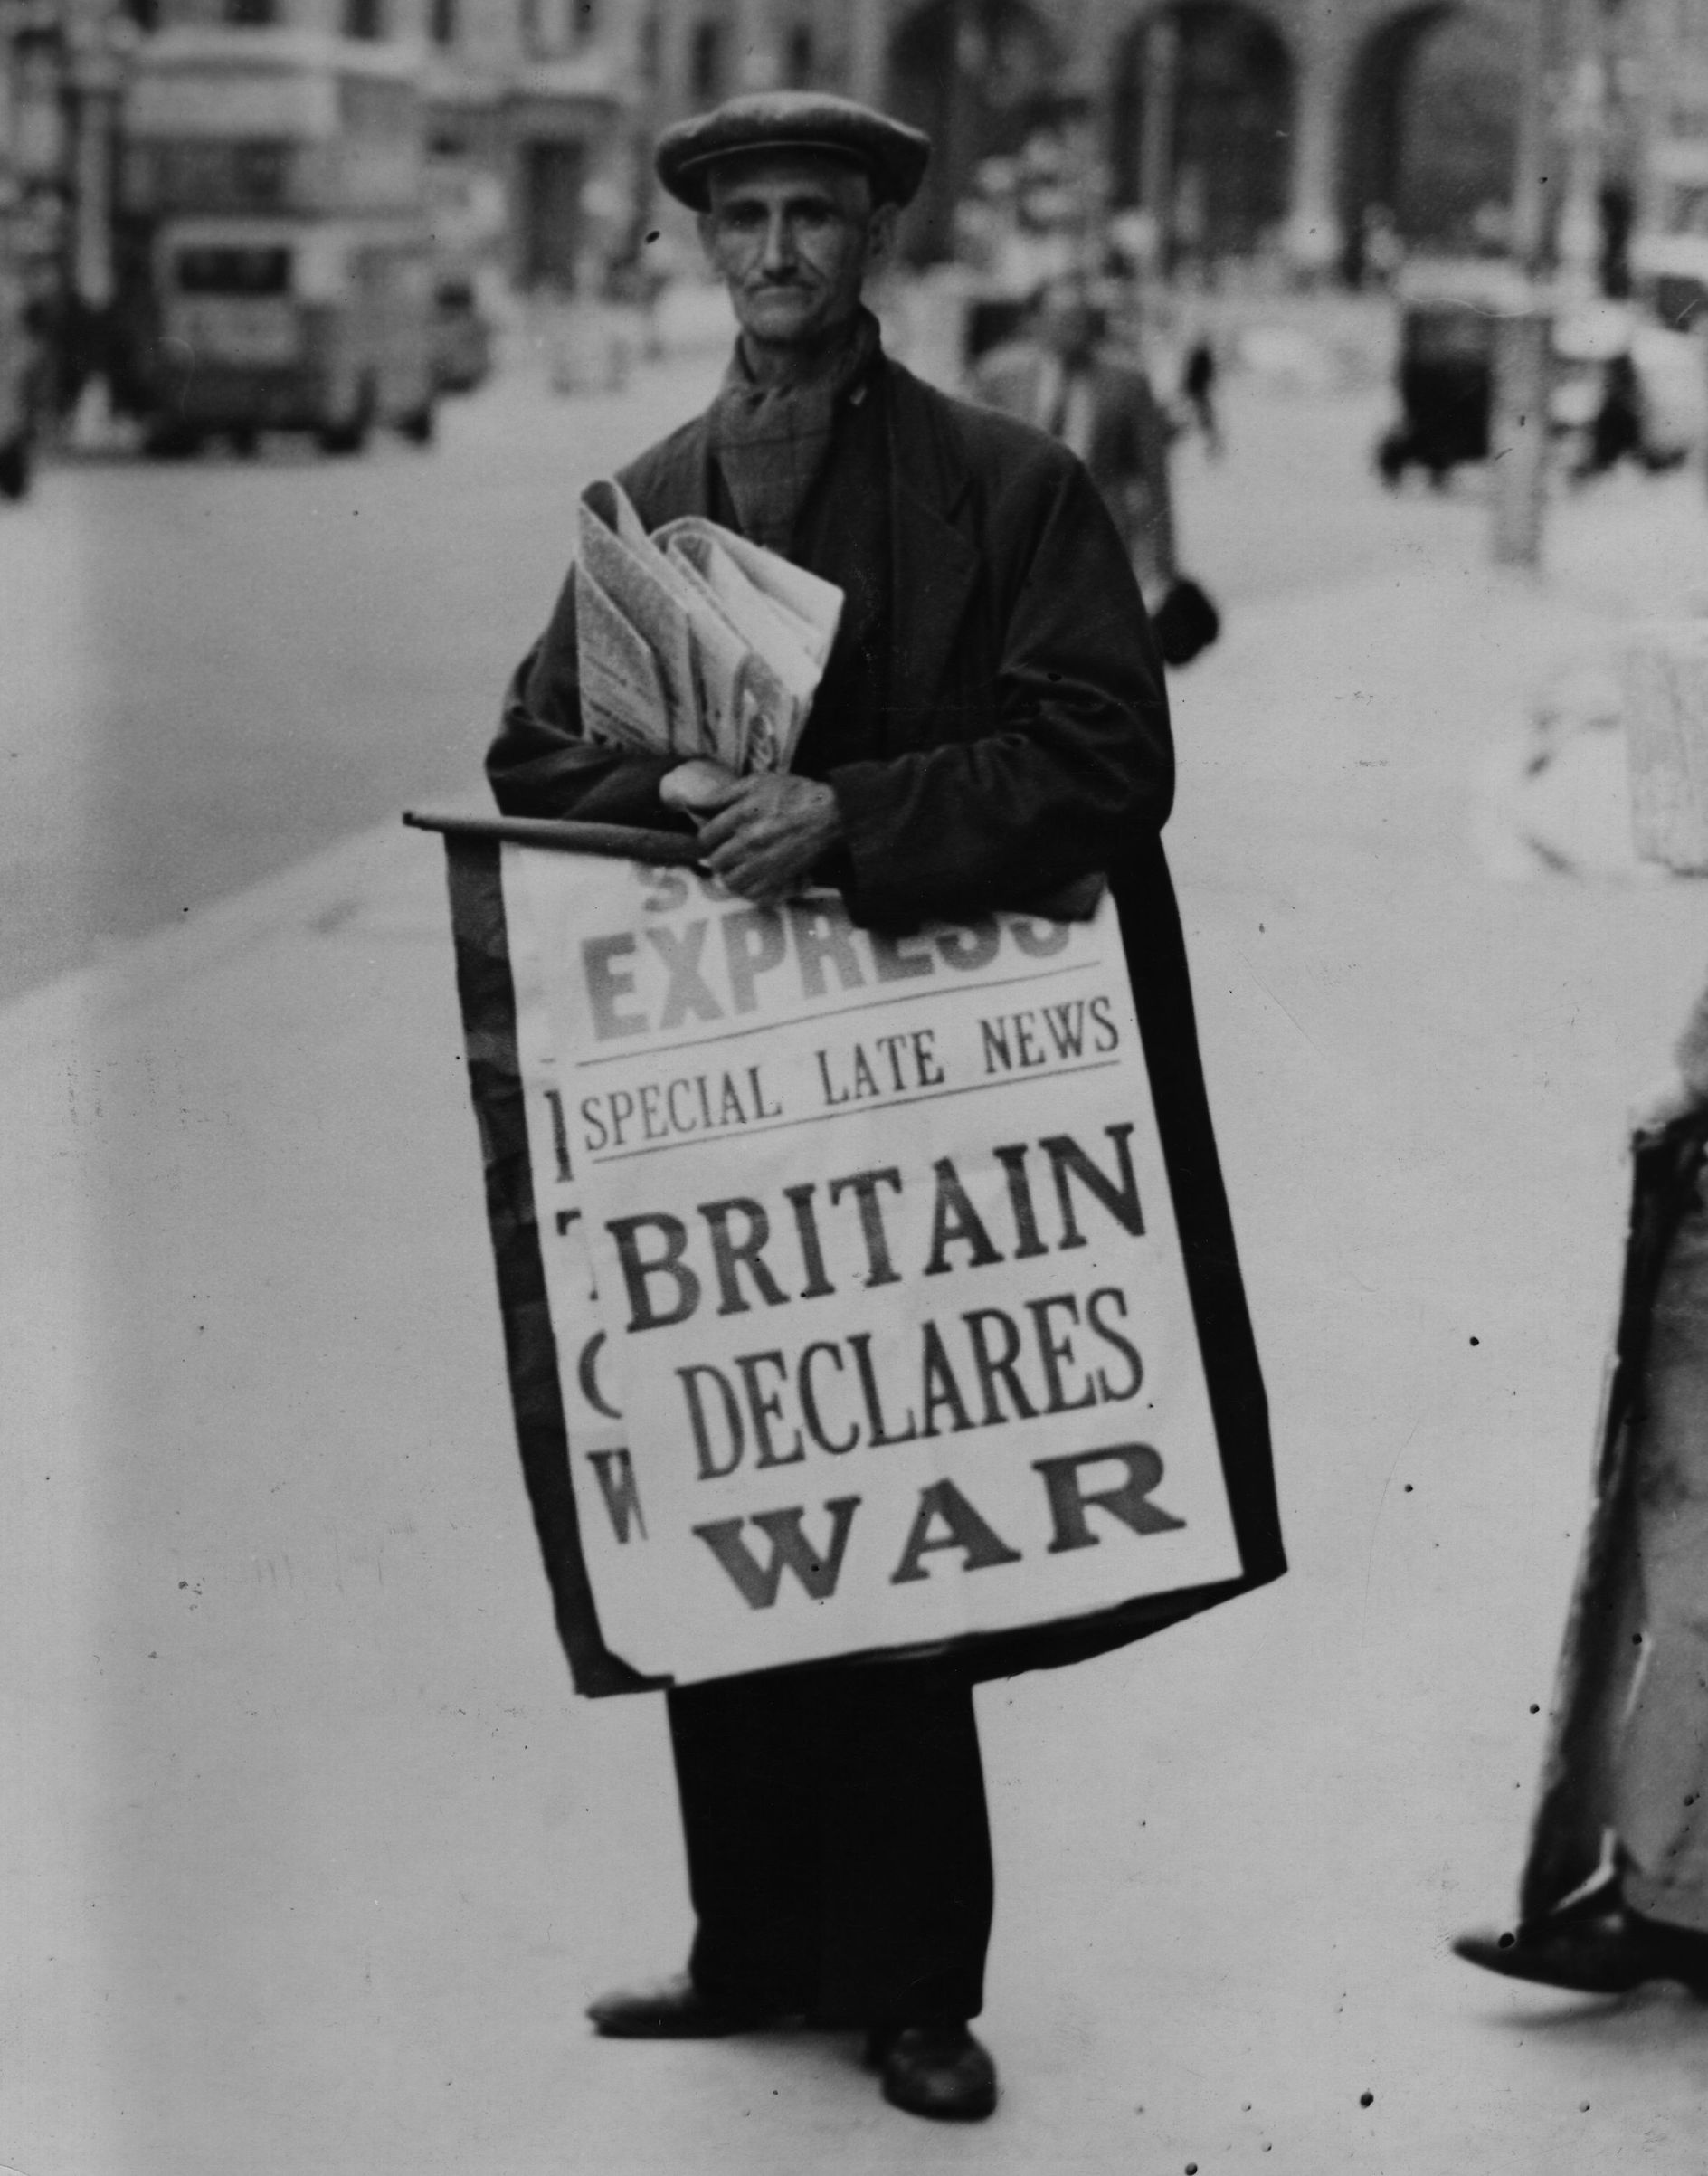 A newspaper seller carries a hoarding pronouncing the declaration of war between Britain and Germany, on the Strand, heading towards Admiralty Arch in London on Aug. 1, 1939. (Getty Images)